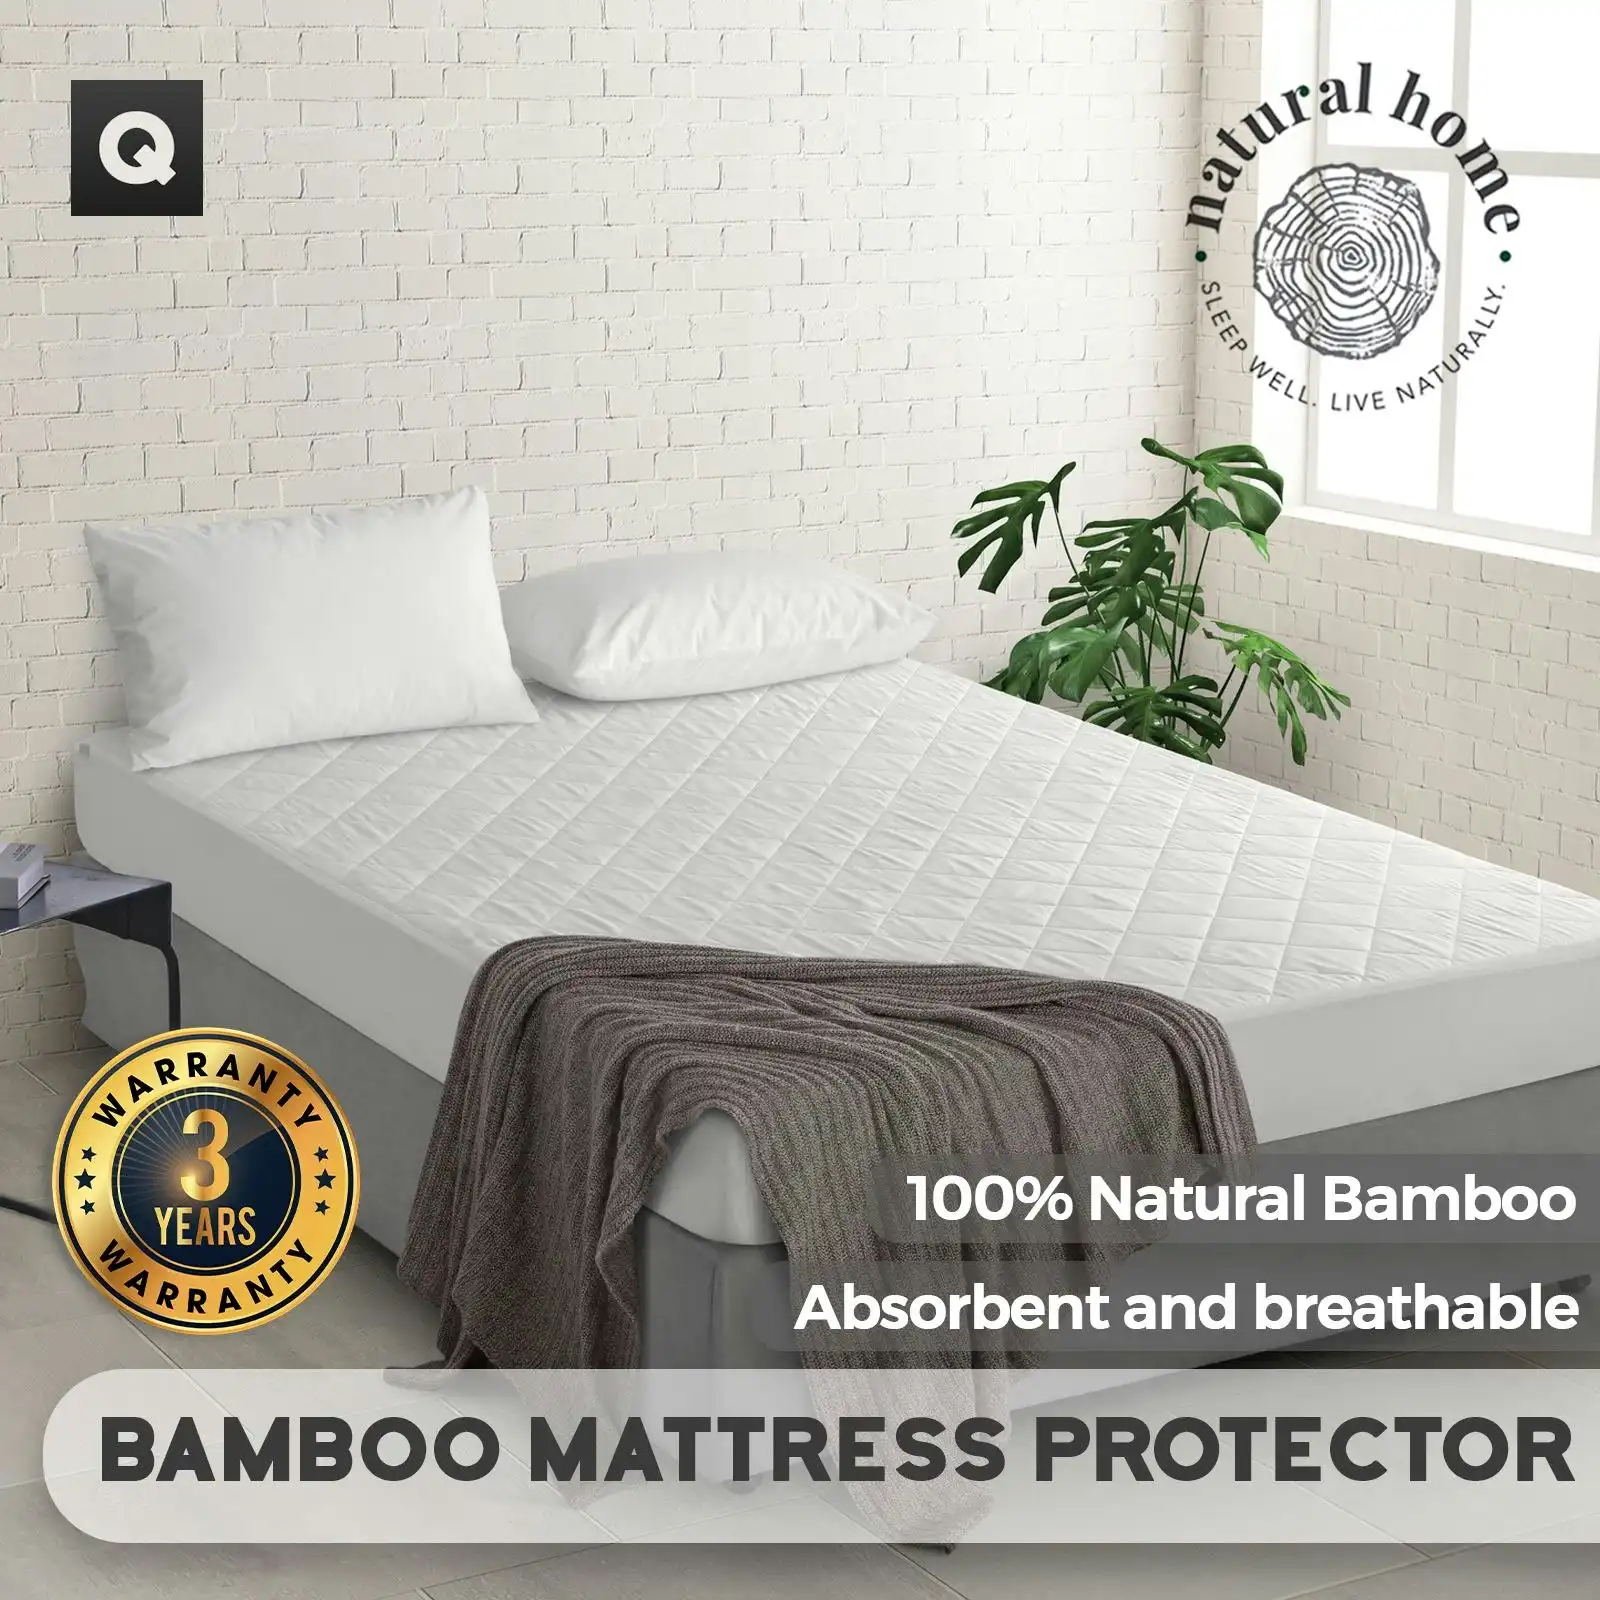 Natural Home Bamboo Quilted Mattress Protector White Queen Bed